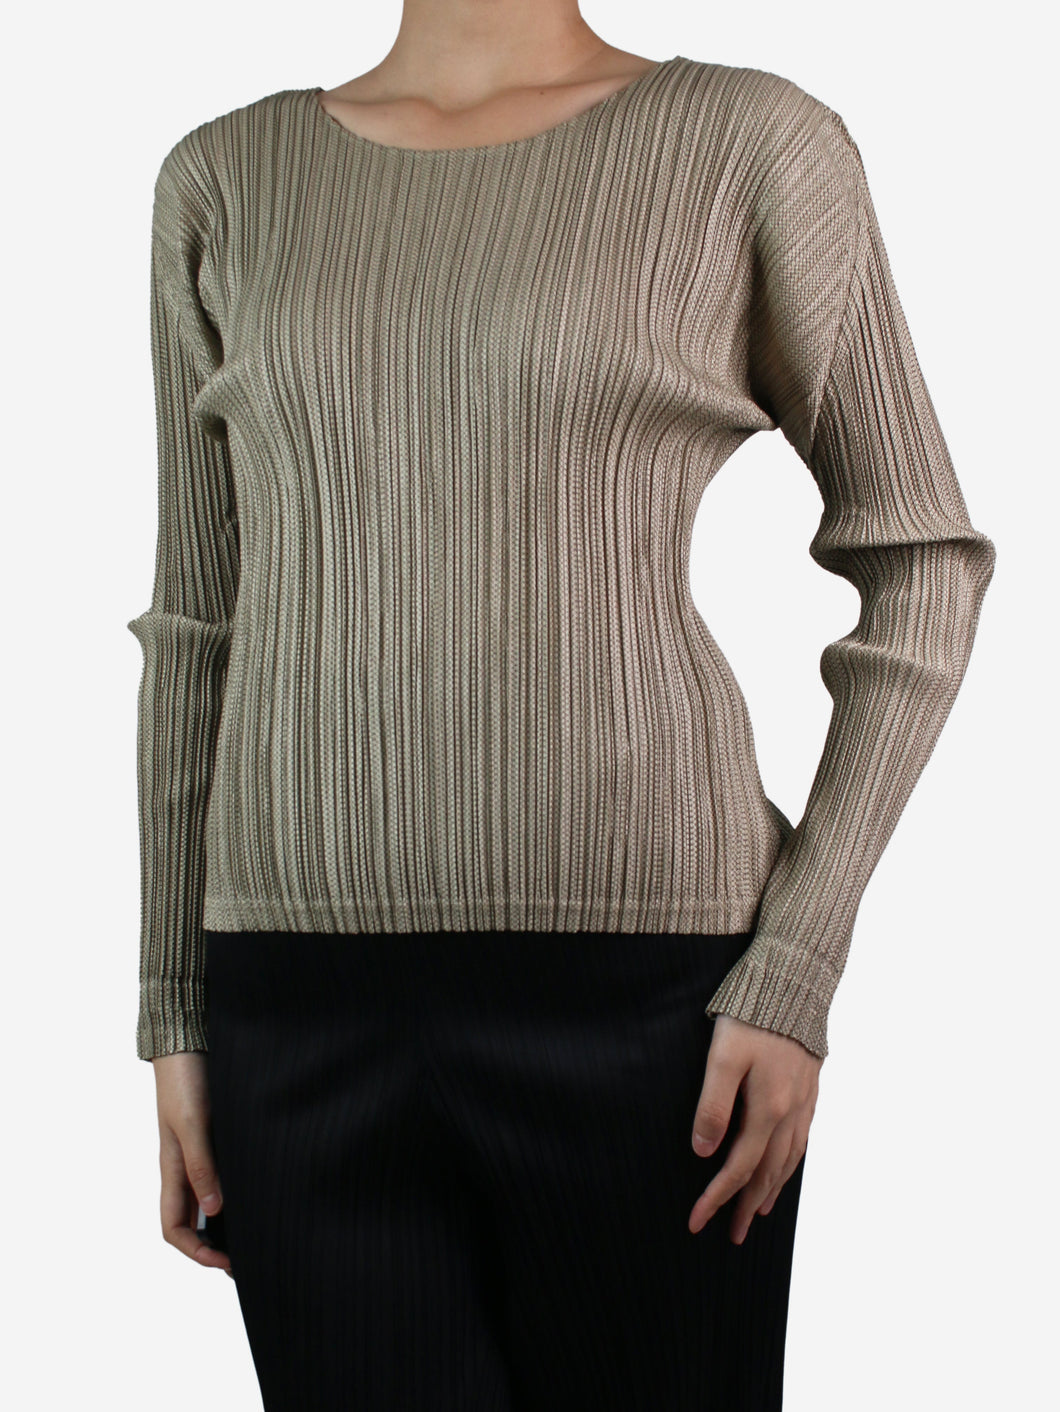 Neutral pleated top - Brand size 3 Tops Pleats Please 